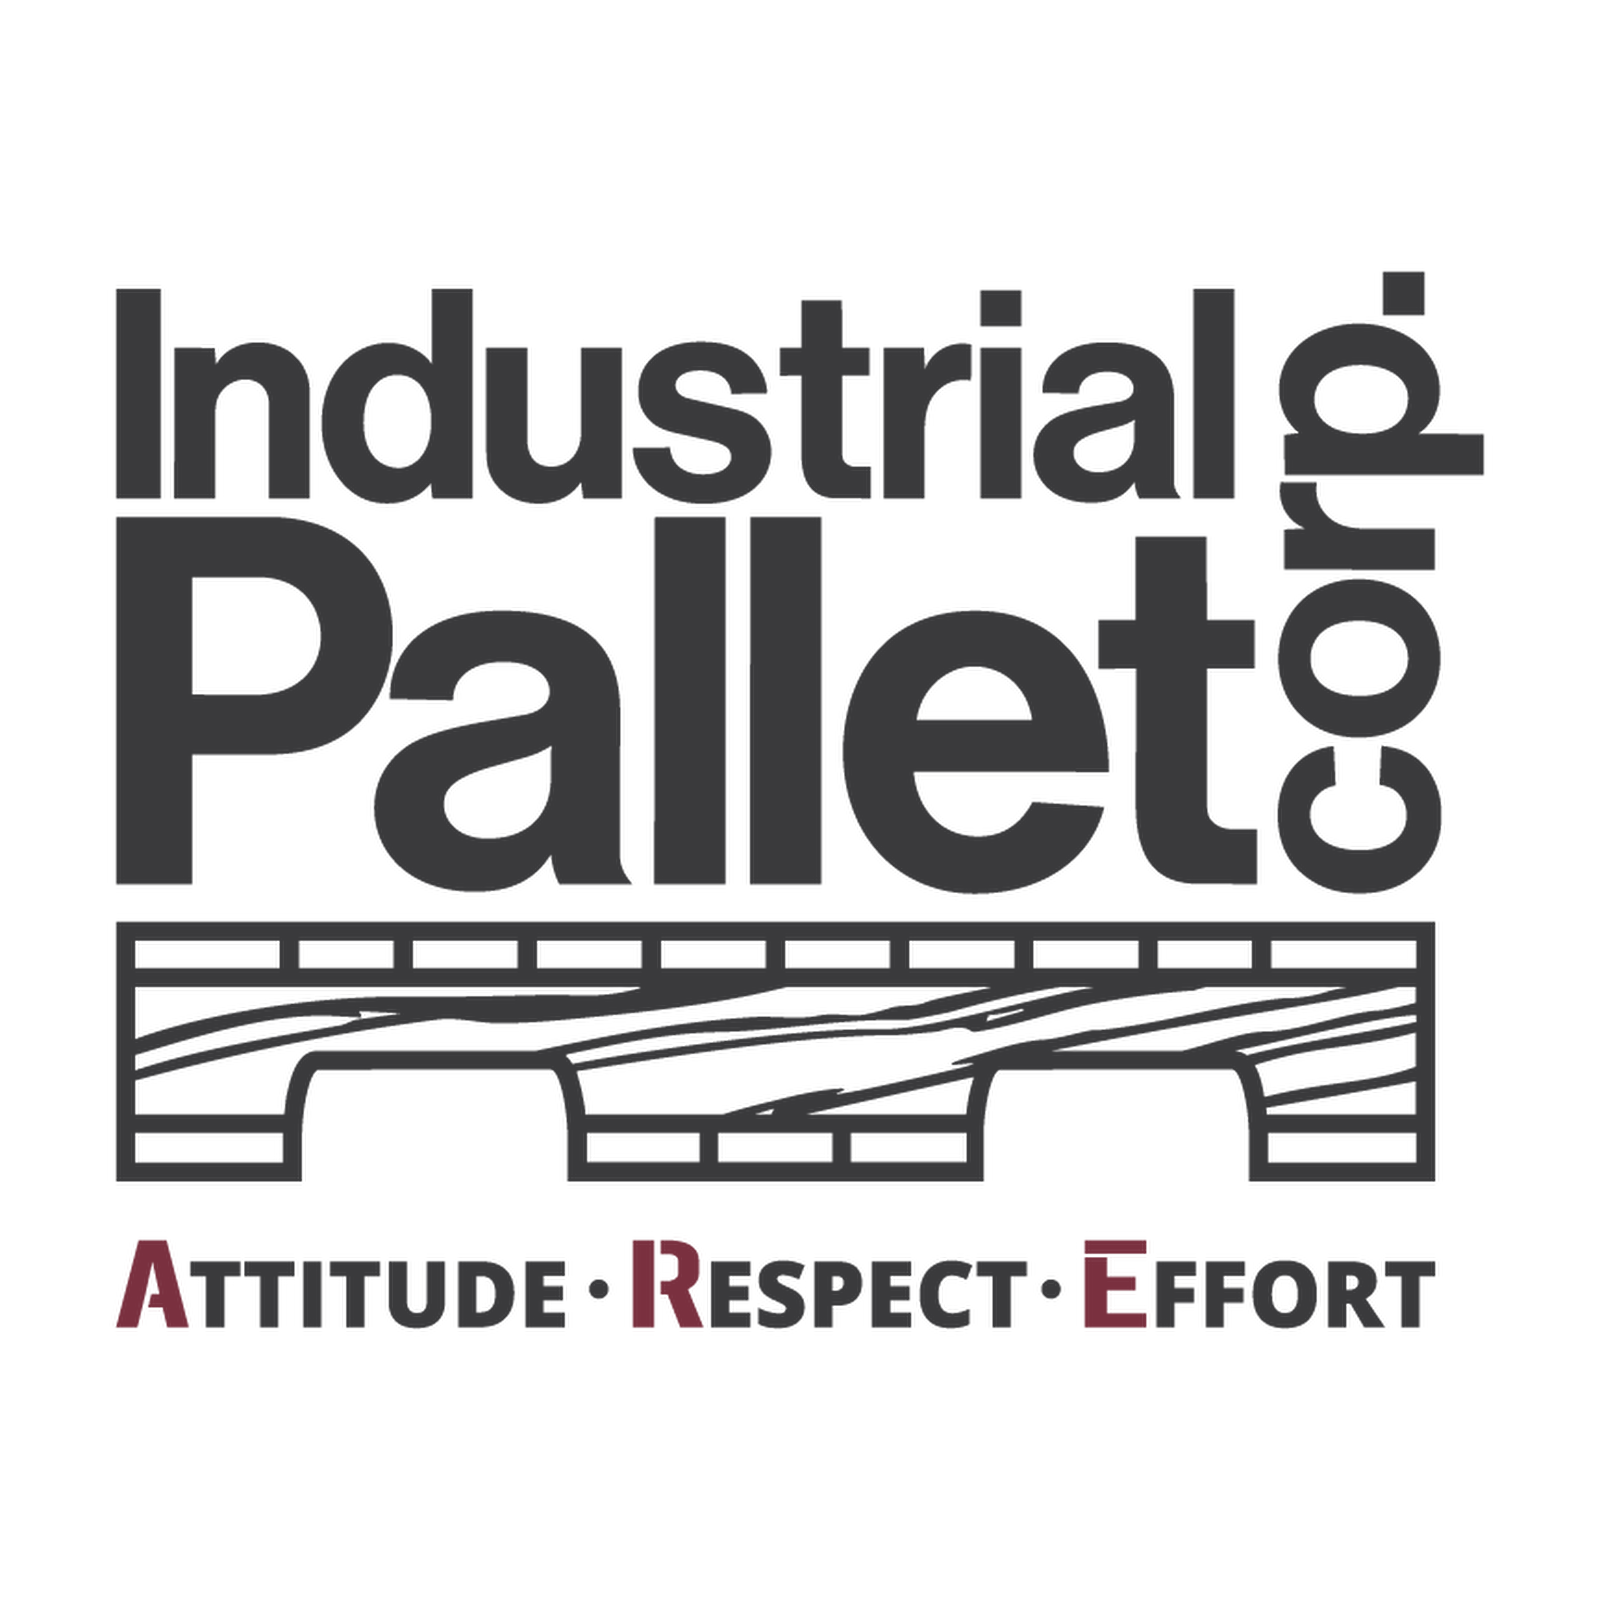 Industrial Pallet Corp.